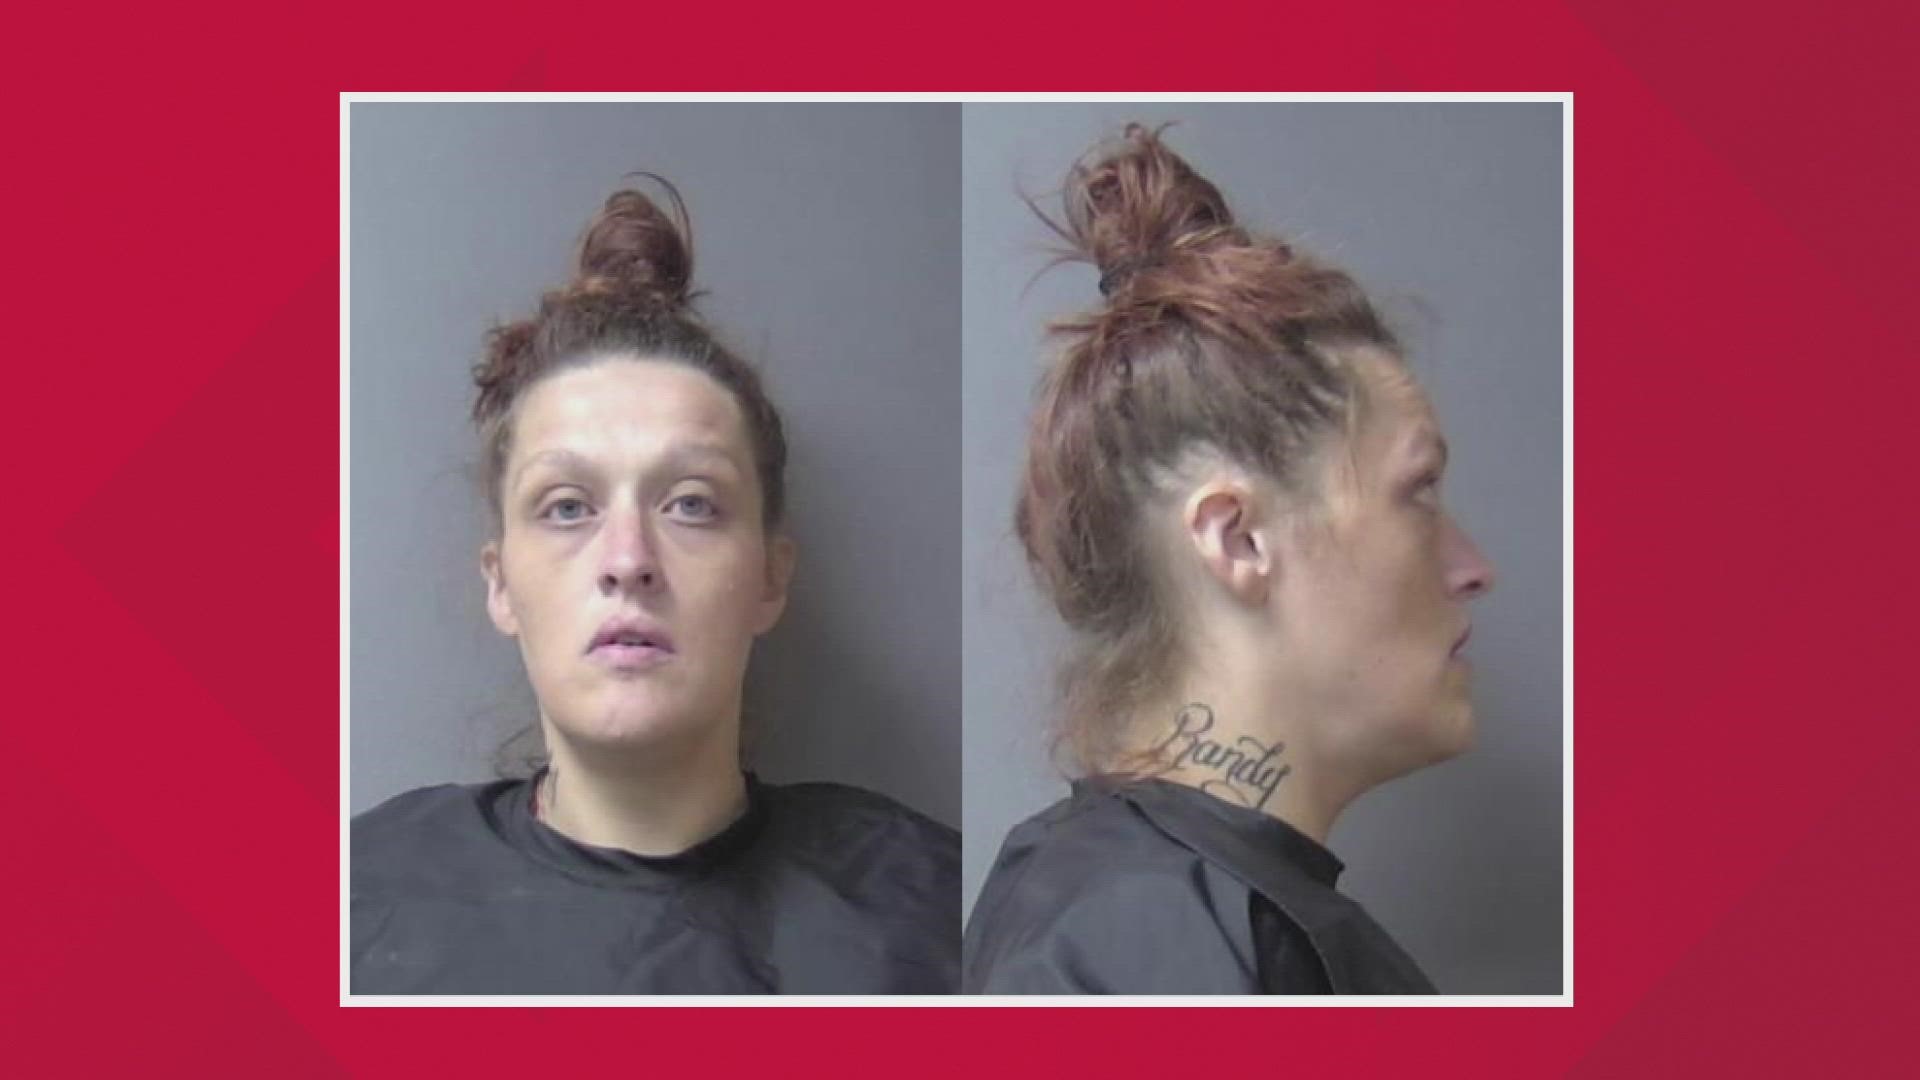 Anderson police are seeking the woman's whereabouts at this hour.